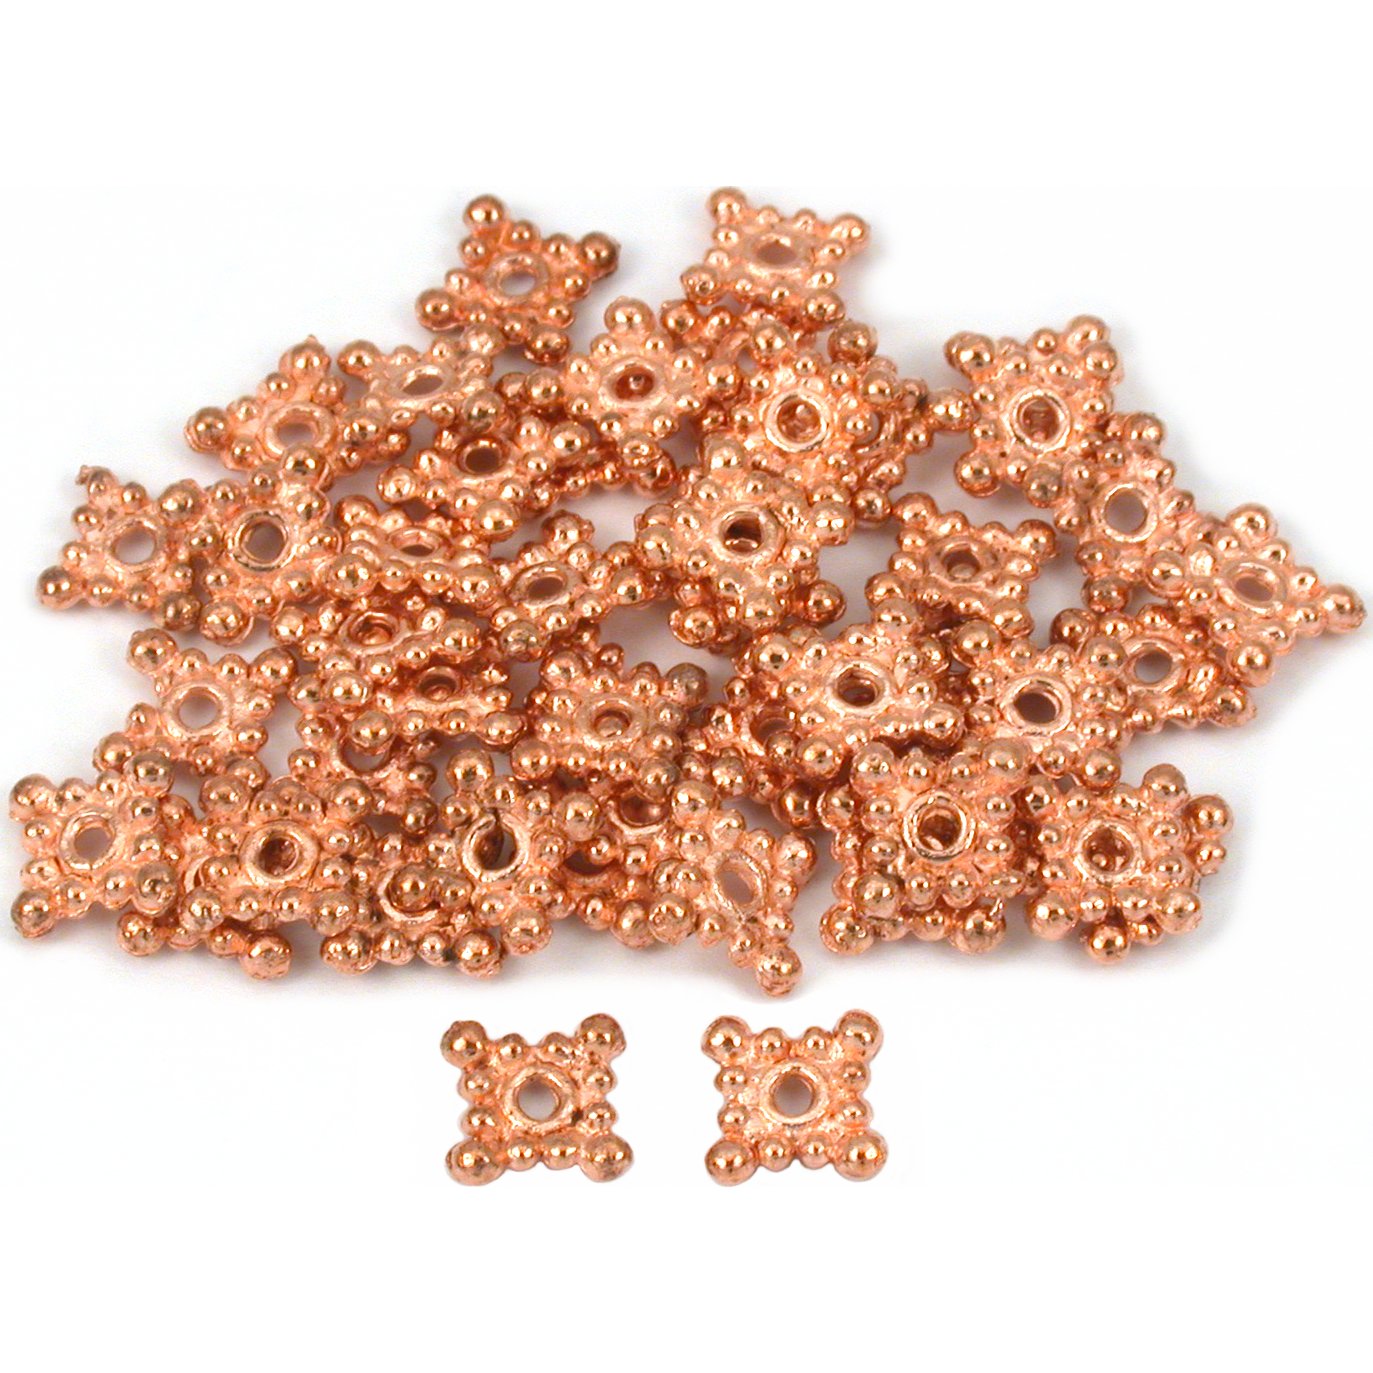 Bali Spacer Square Copper Plated Beads 8mm 50Pcs Approx.